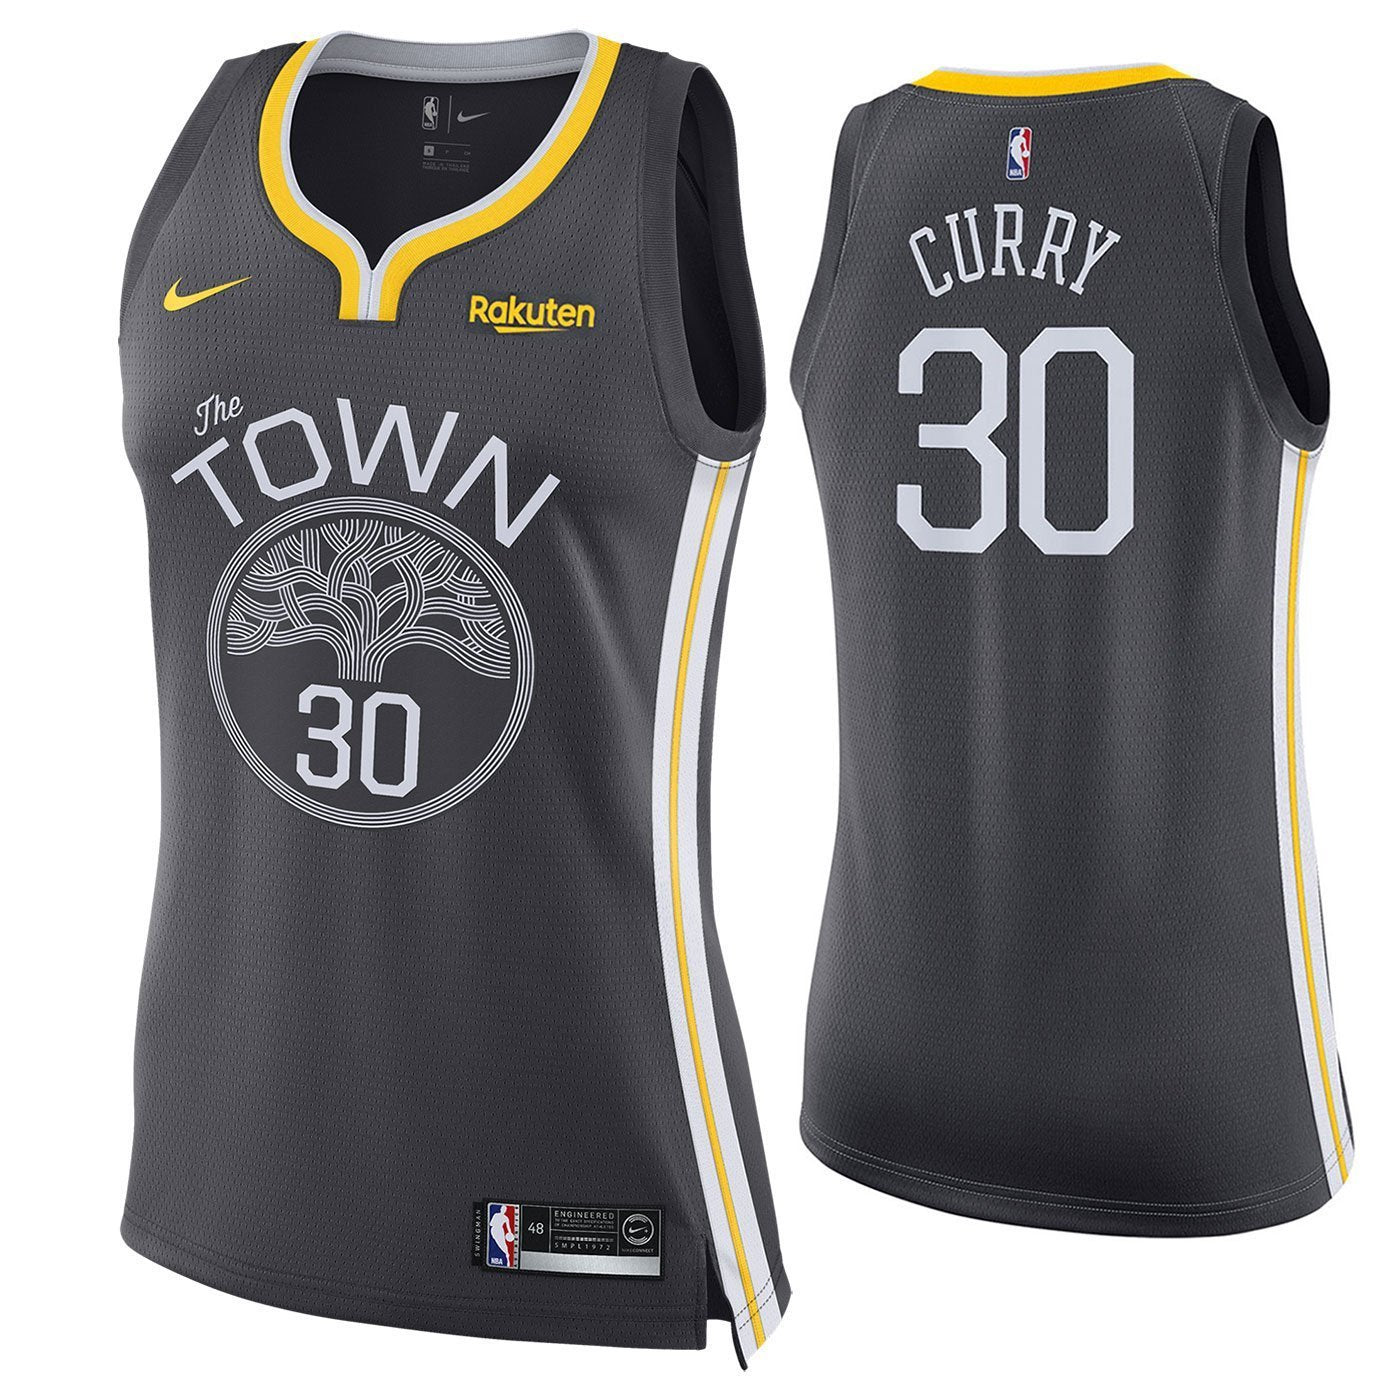 curry jersey for women